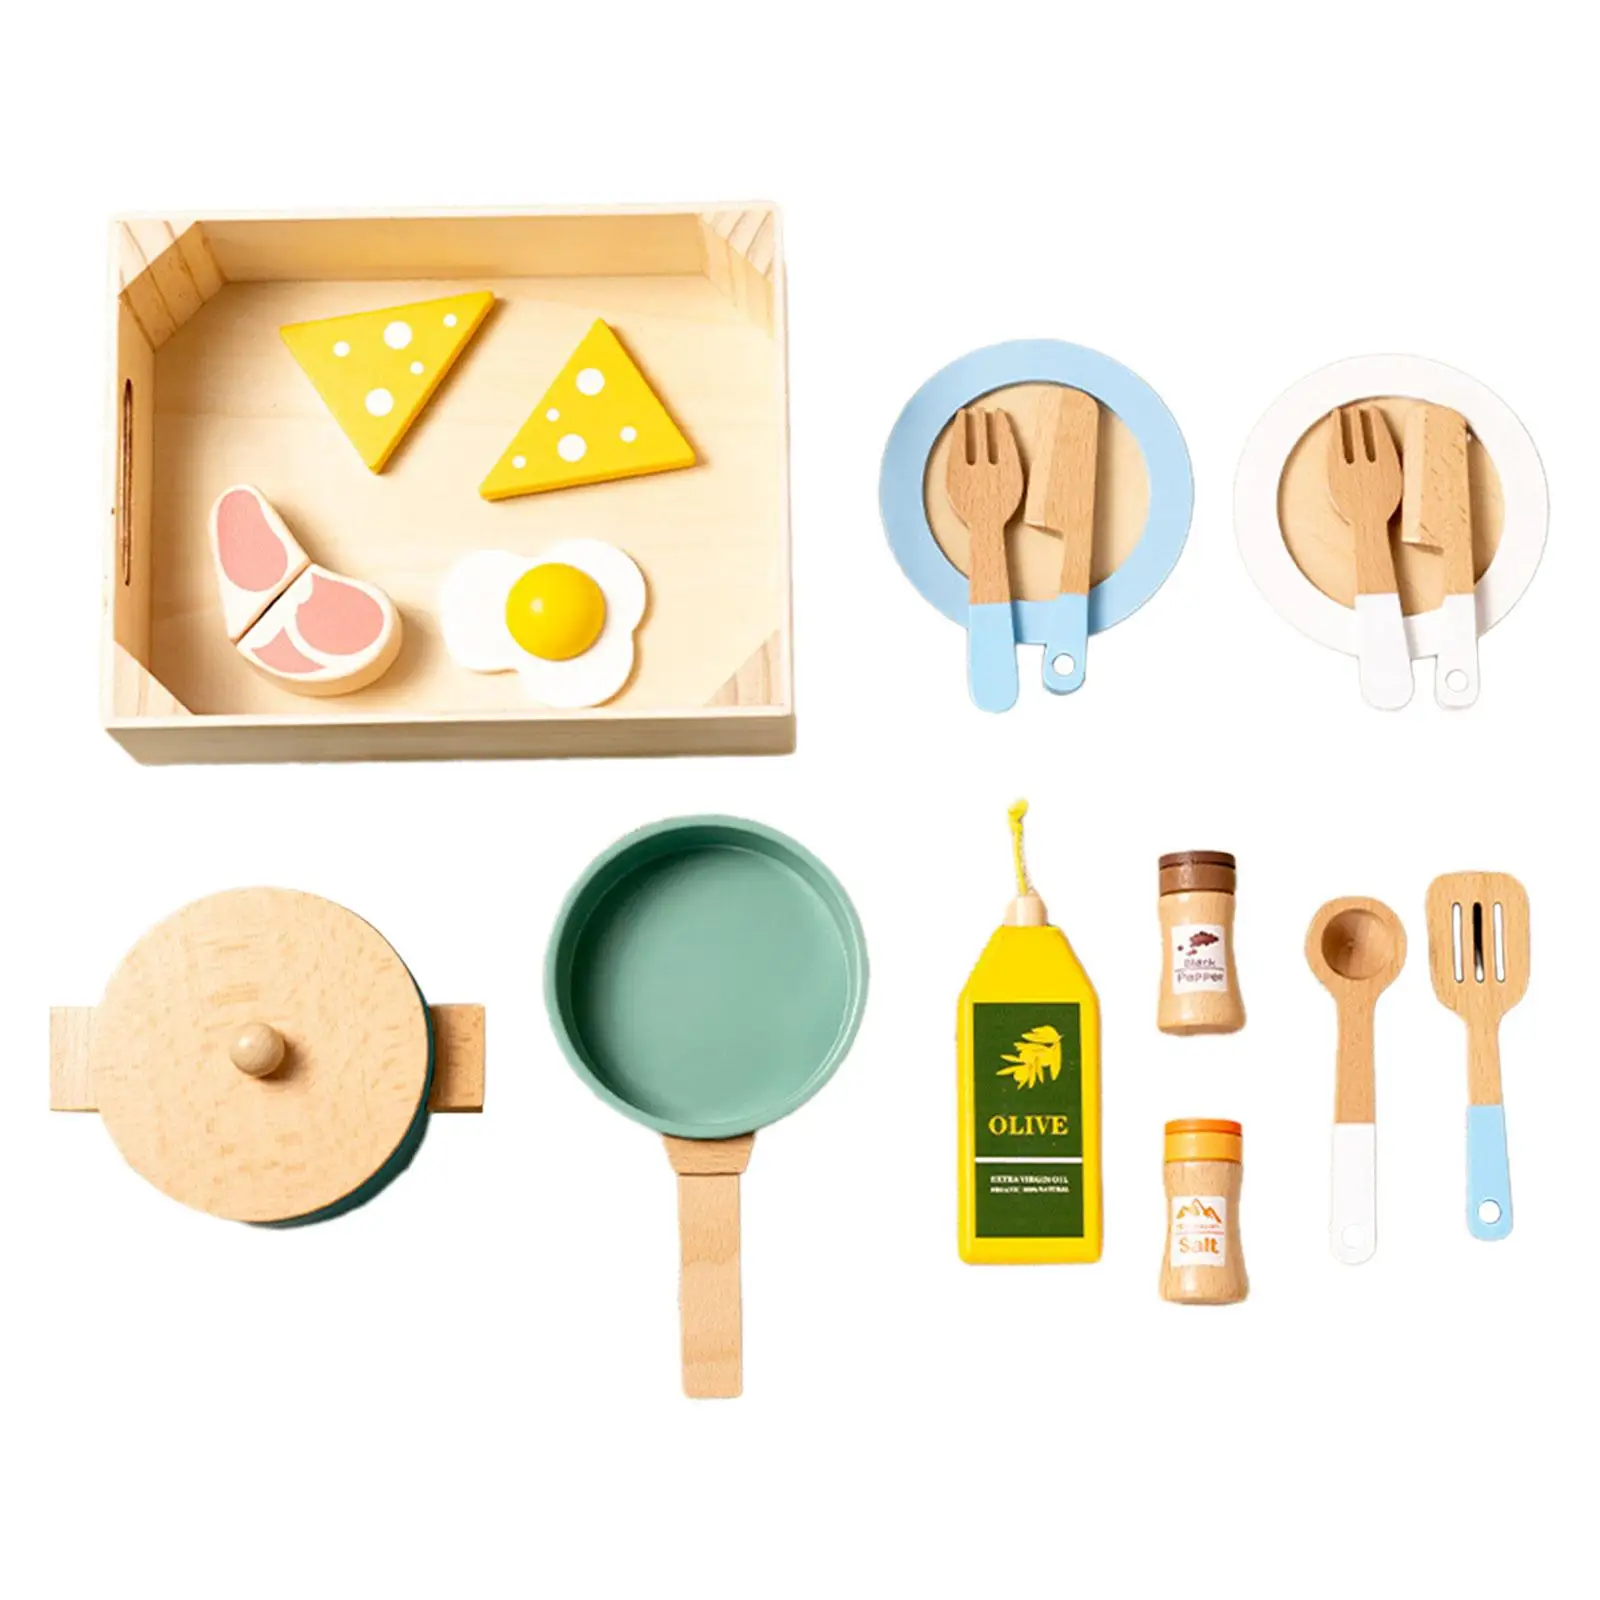 Kids Pretend Play Simulation Toddlers Cooking Playset for Furnishings Window Display Party Favors Crafts Landscape Decorations